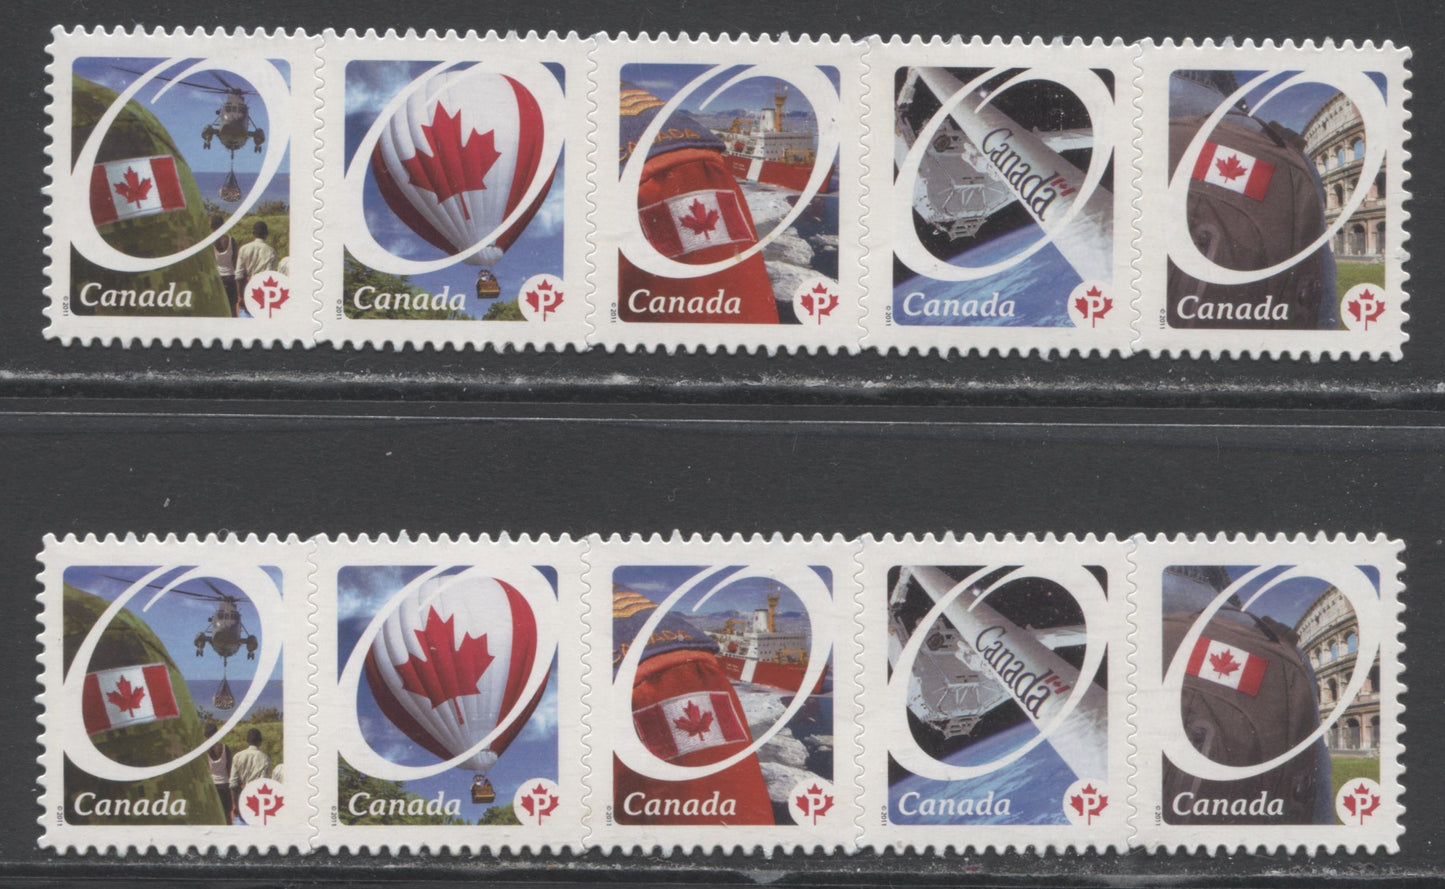 Lot 126 Canada #2423i P(59c) Multicolored Flags, 2011 Canadian Pride, 2 VFNH Strips Of 5, Die Cut To Shape On HF & HB Backing Papers